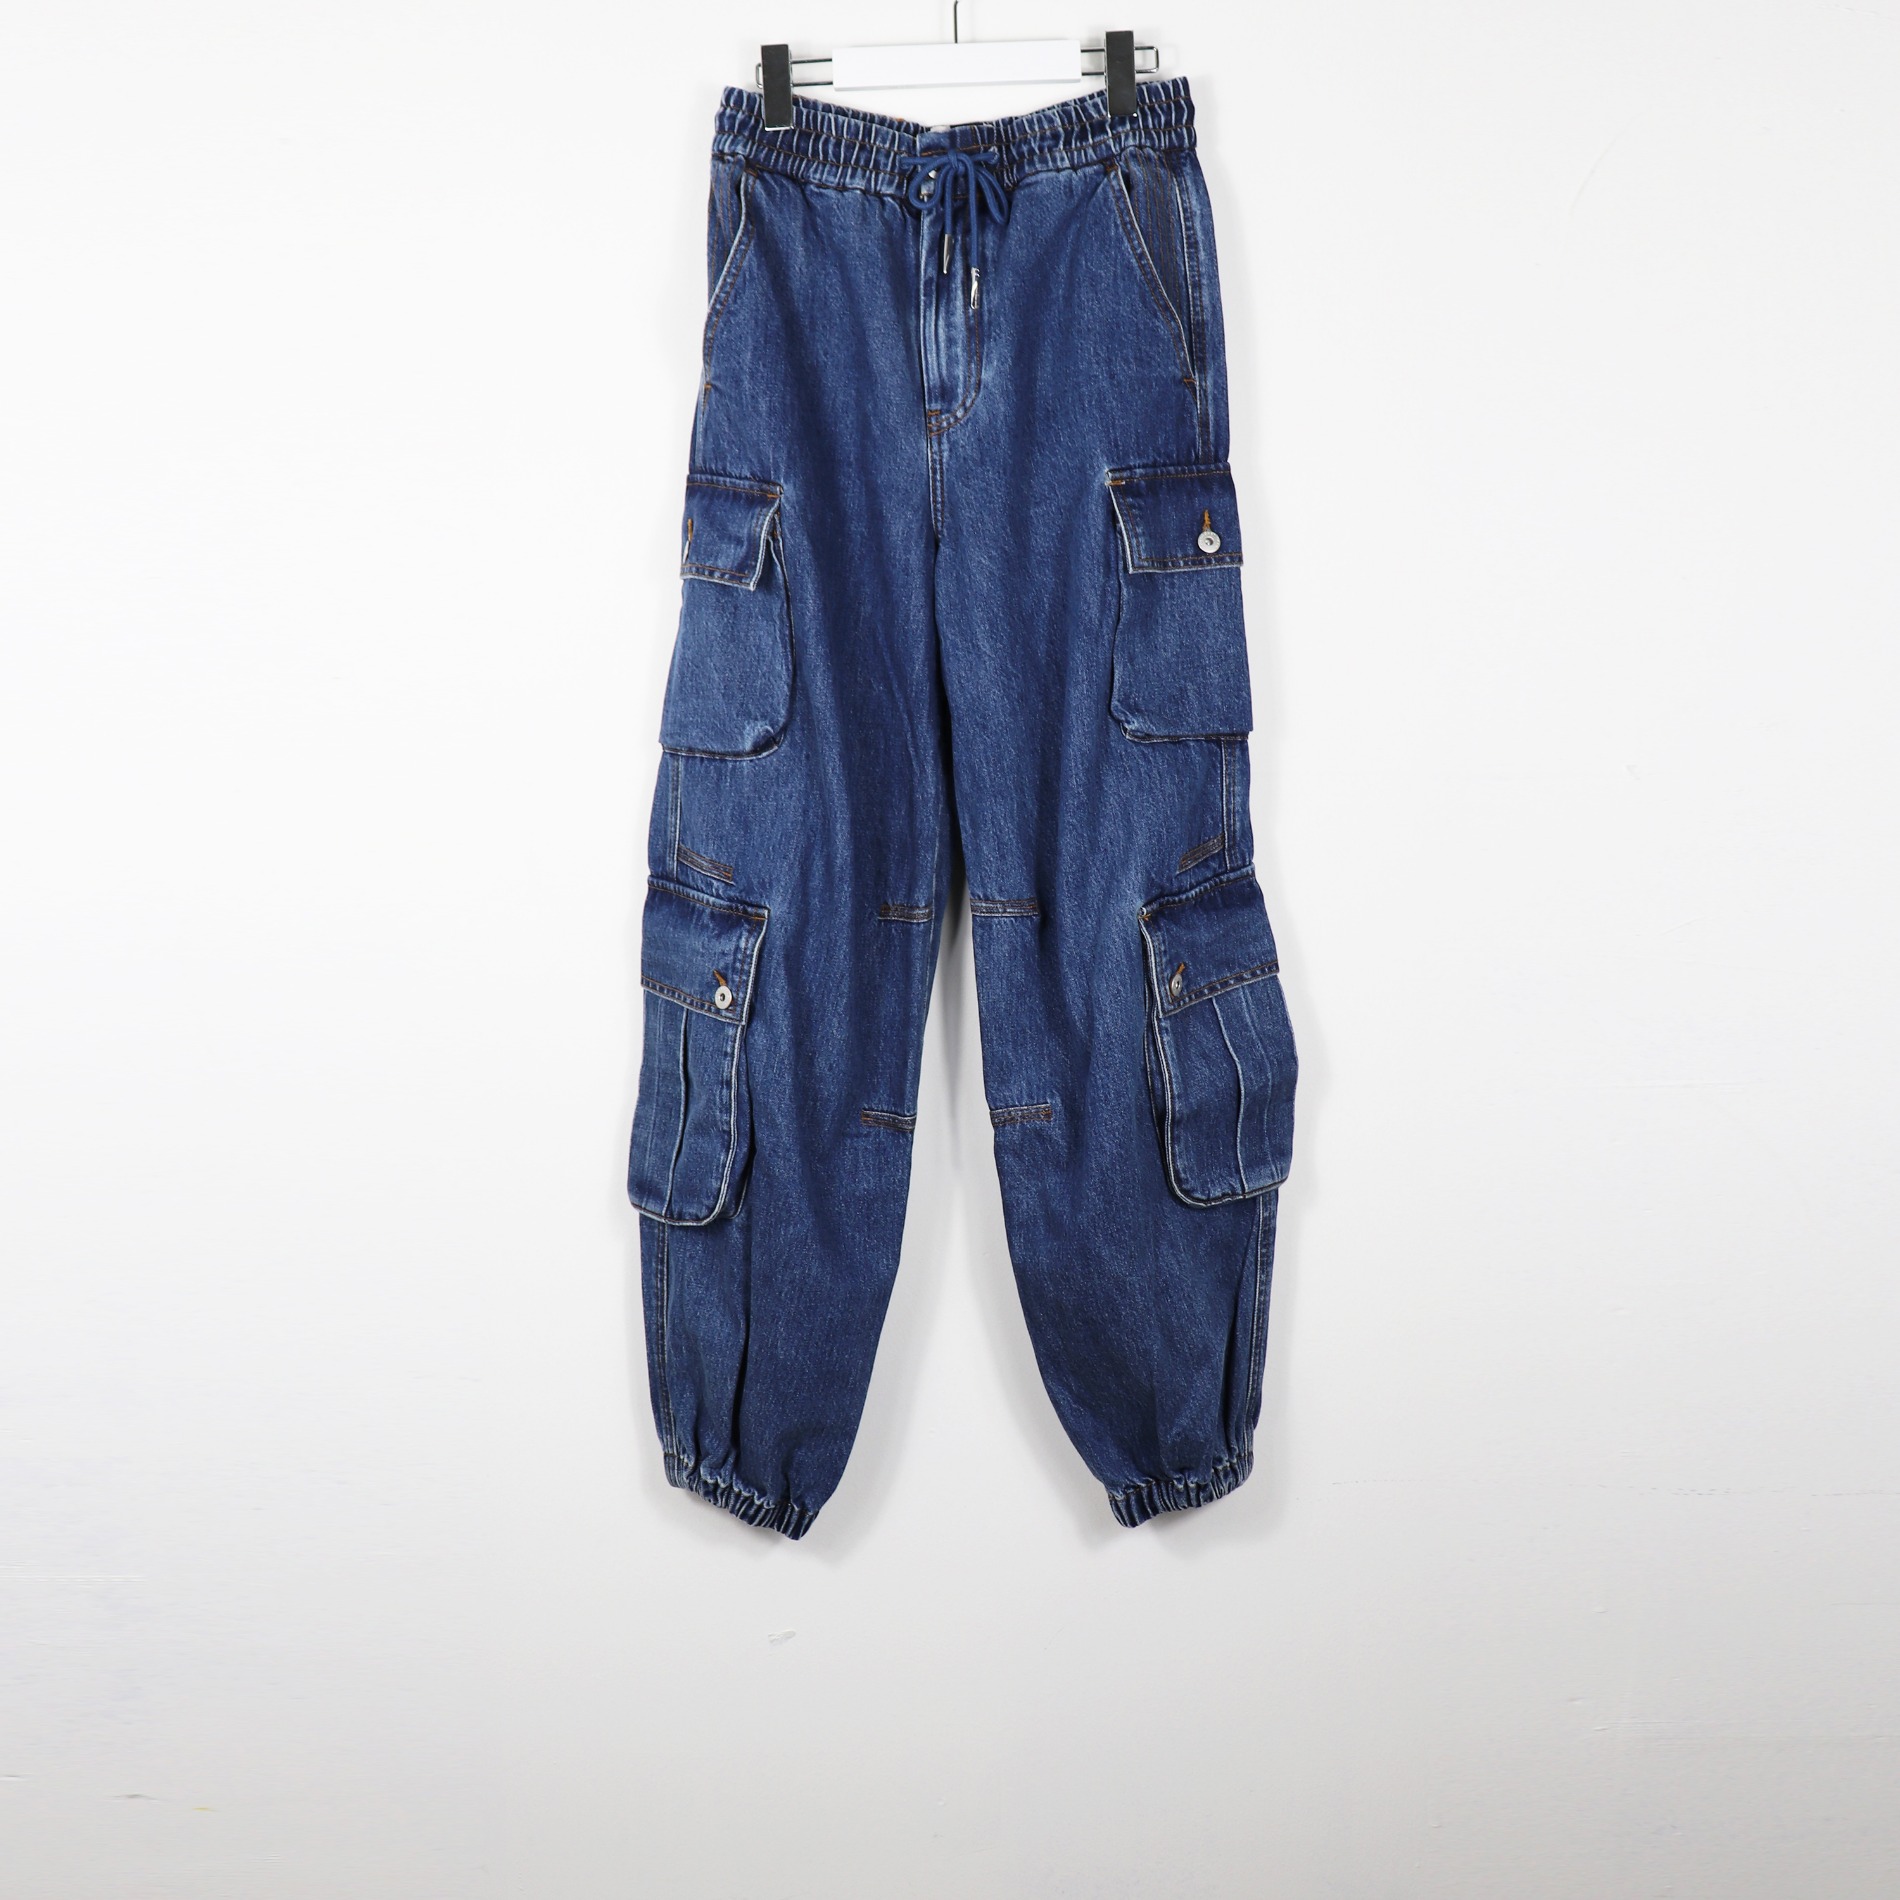 FENG CHEN WANG WASHED JEANS BLUE